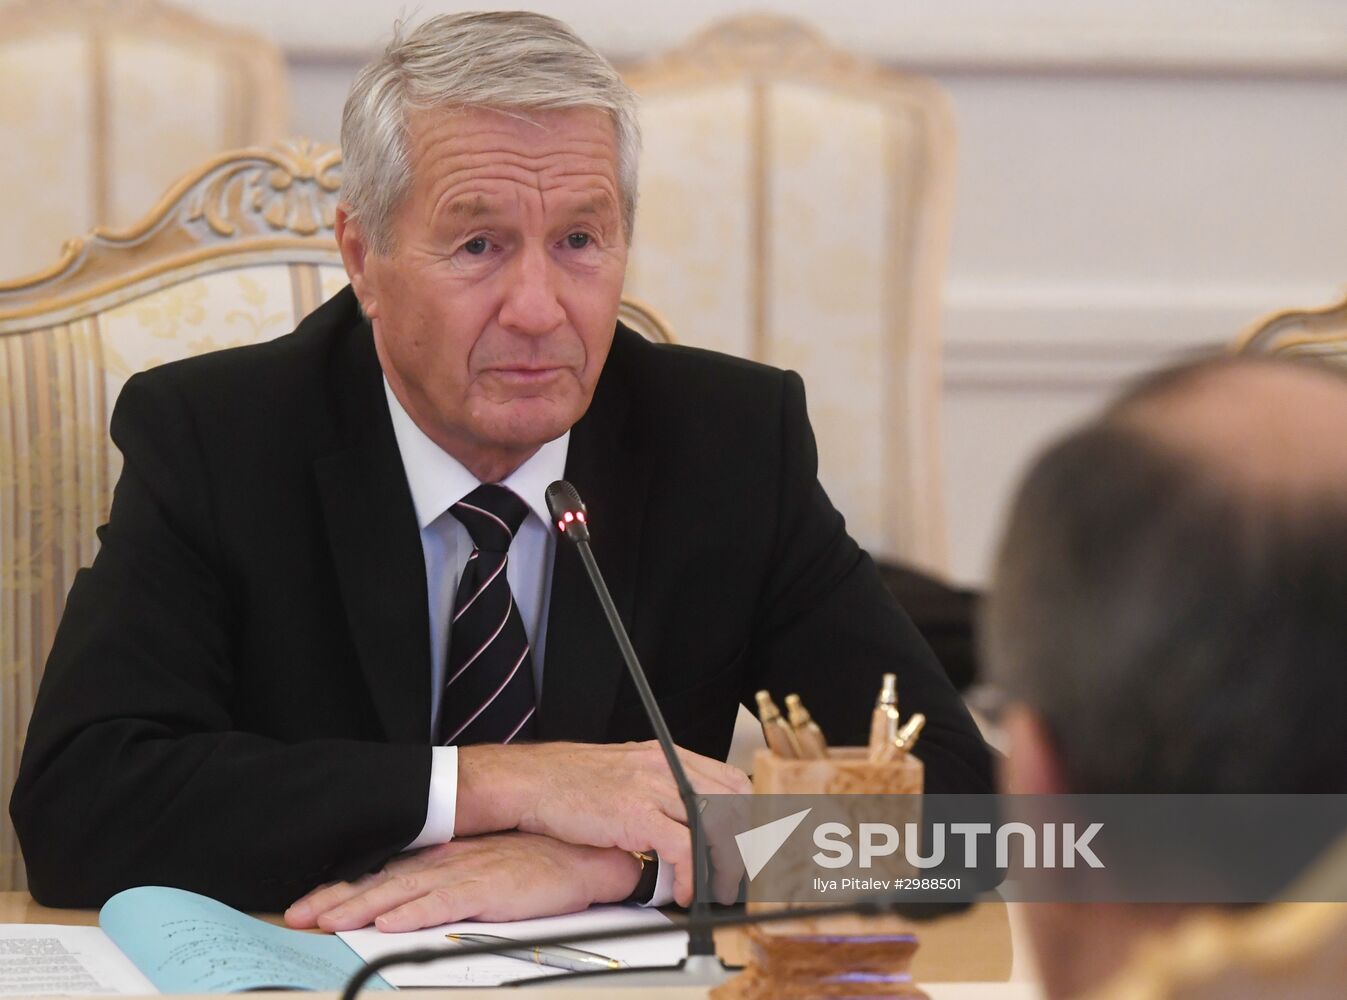 Russian Foreign Minister Lavrov meets with Council of Europe Secretary General Jagland